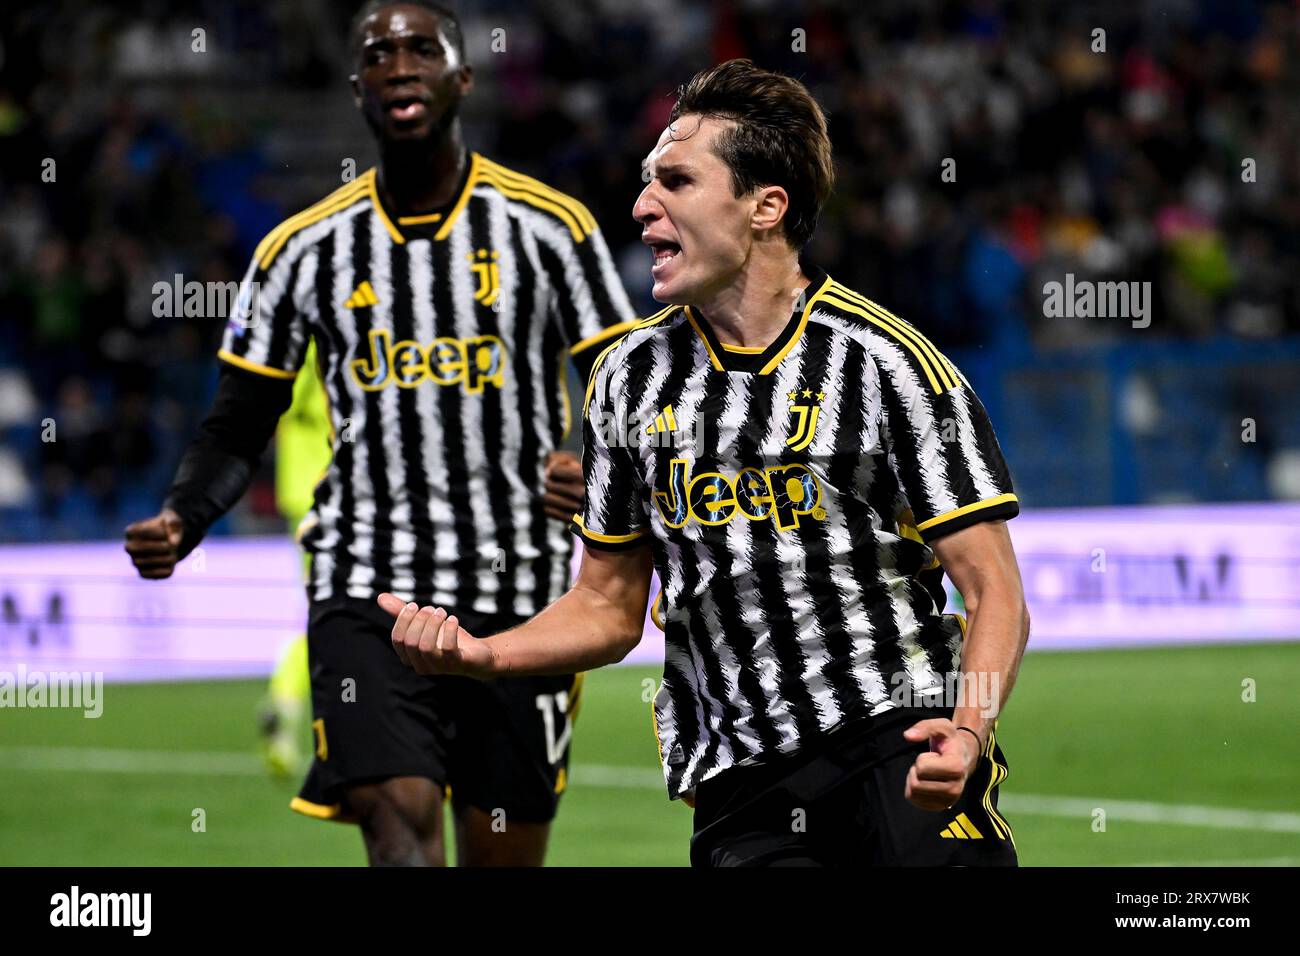 Reggio Emilia, Italy. 23rd Sep, 2023. Federico Chiesa of Juventus FC celebrates after scoring the goal of 2-2 for his side during the Serie A football match between US Sassuolo and Juventus FC at Citta del Tricolore stadium in Reggio Emilia (Italy), September 23rd, 2023. Credit: Insidefoto di andrea staccioli/Alamy Live News Stock Photo